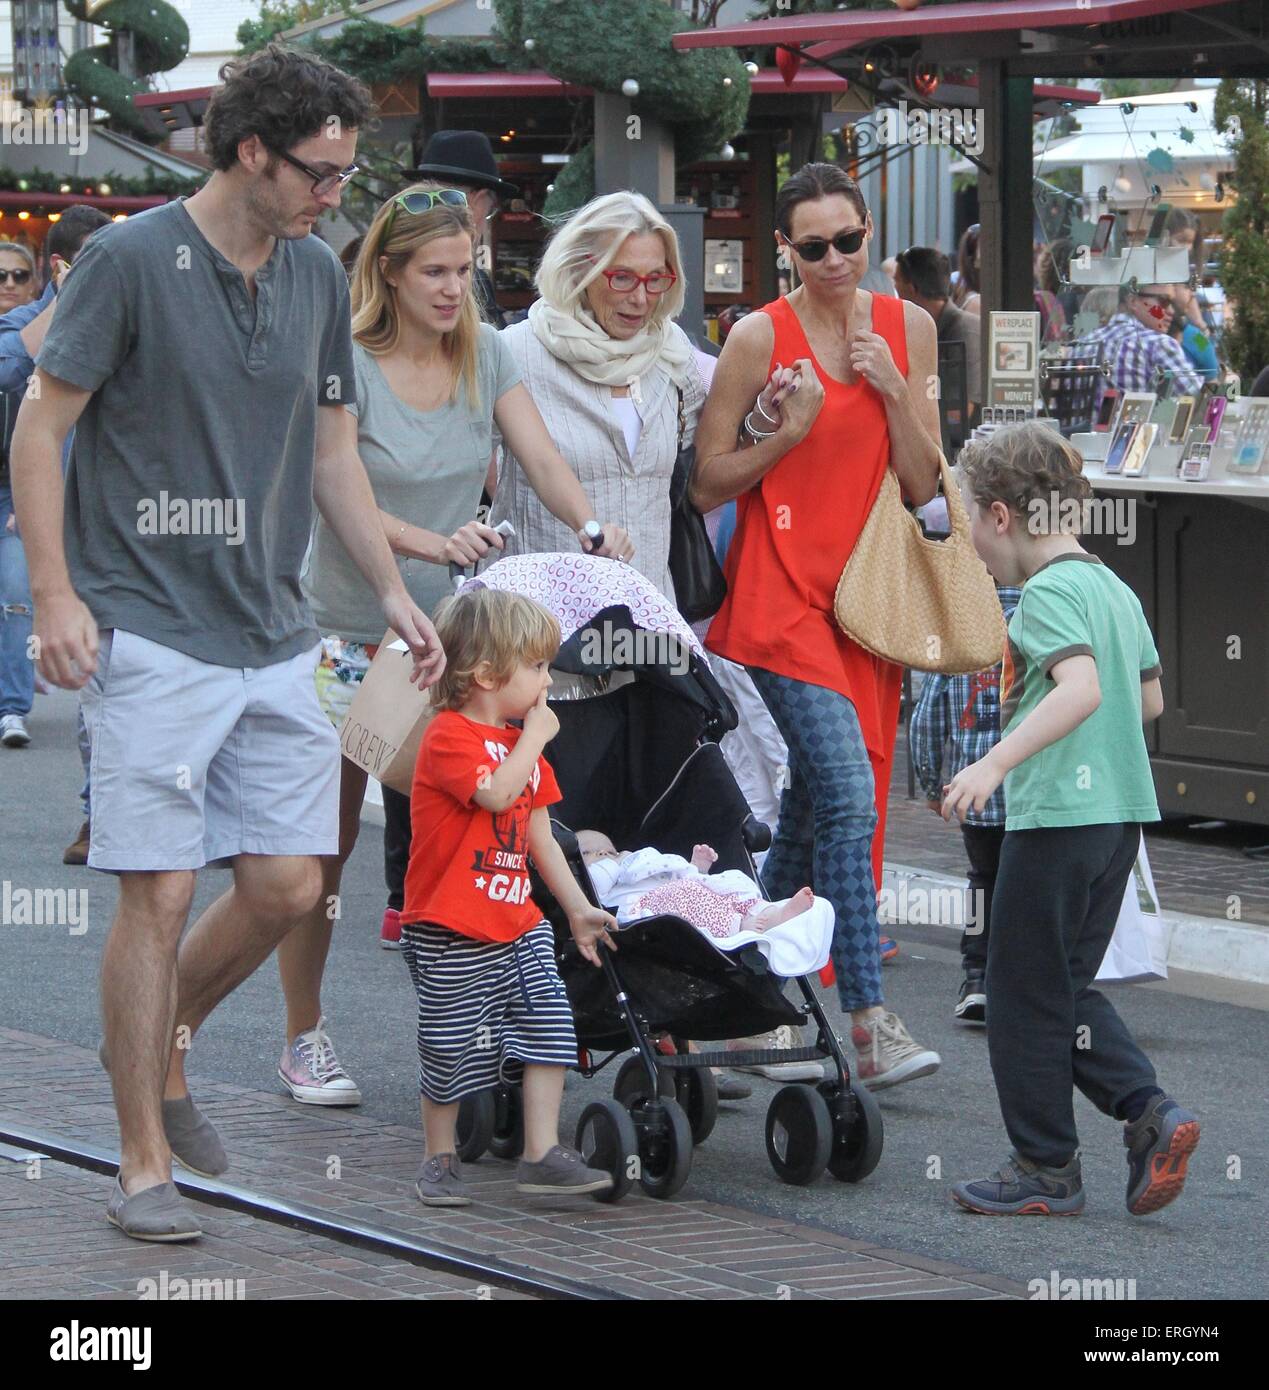 Minnie Driver goes shopping with her family on Black Friday at The Grove  Featuring: Minnie Driver,Henry Story DriverMother Gaynor Churchyard,sister Kate Where: Hollywood, California, United States When: 28 Nov 2014 Credit: WENN.com Stock Photo